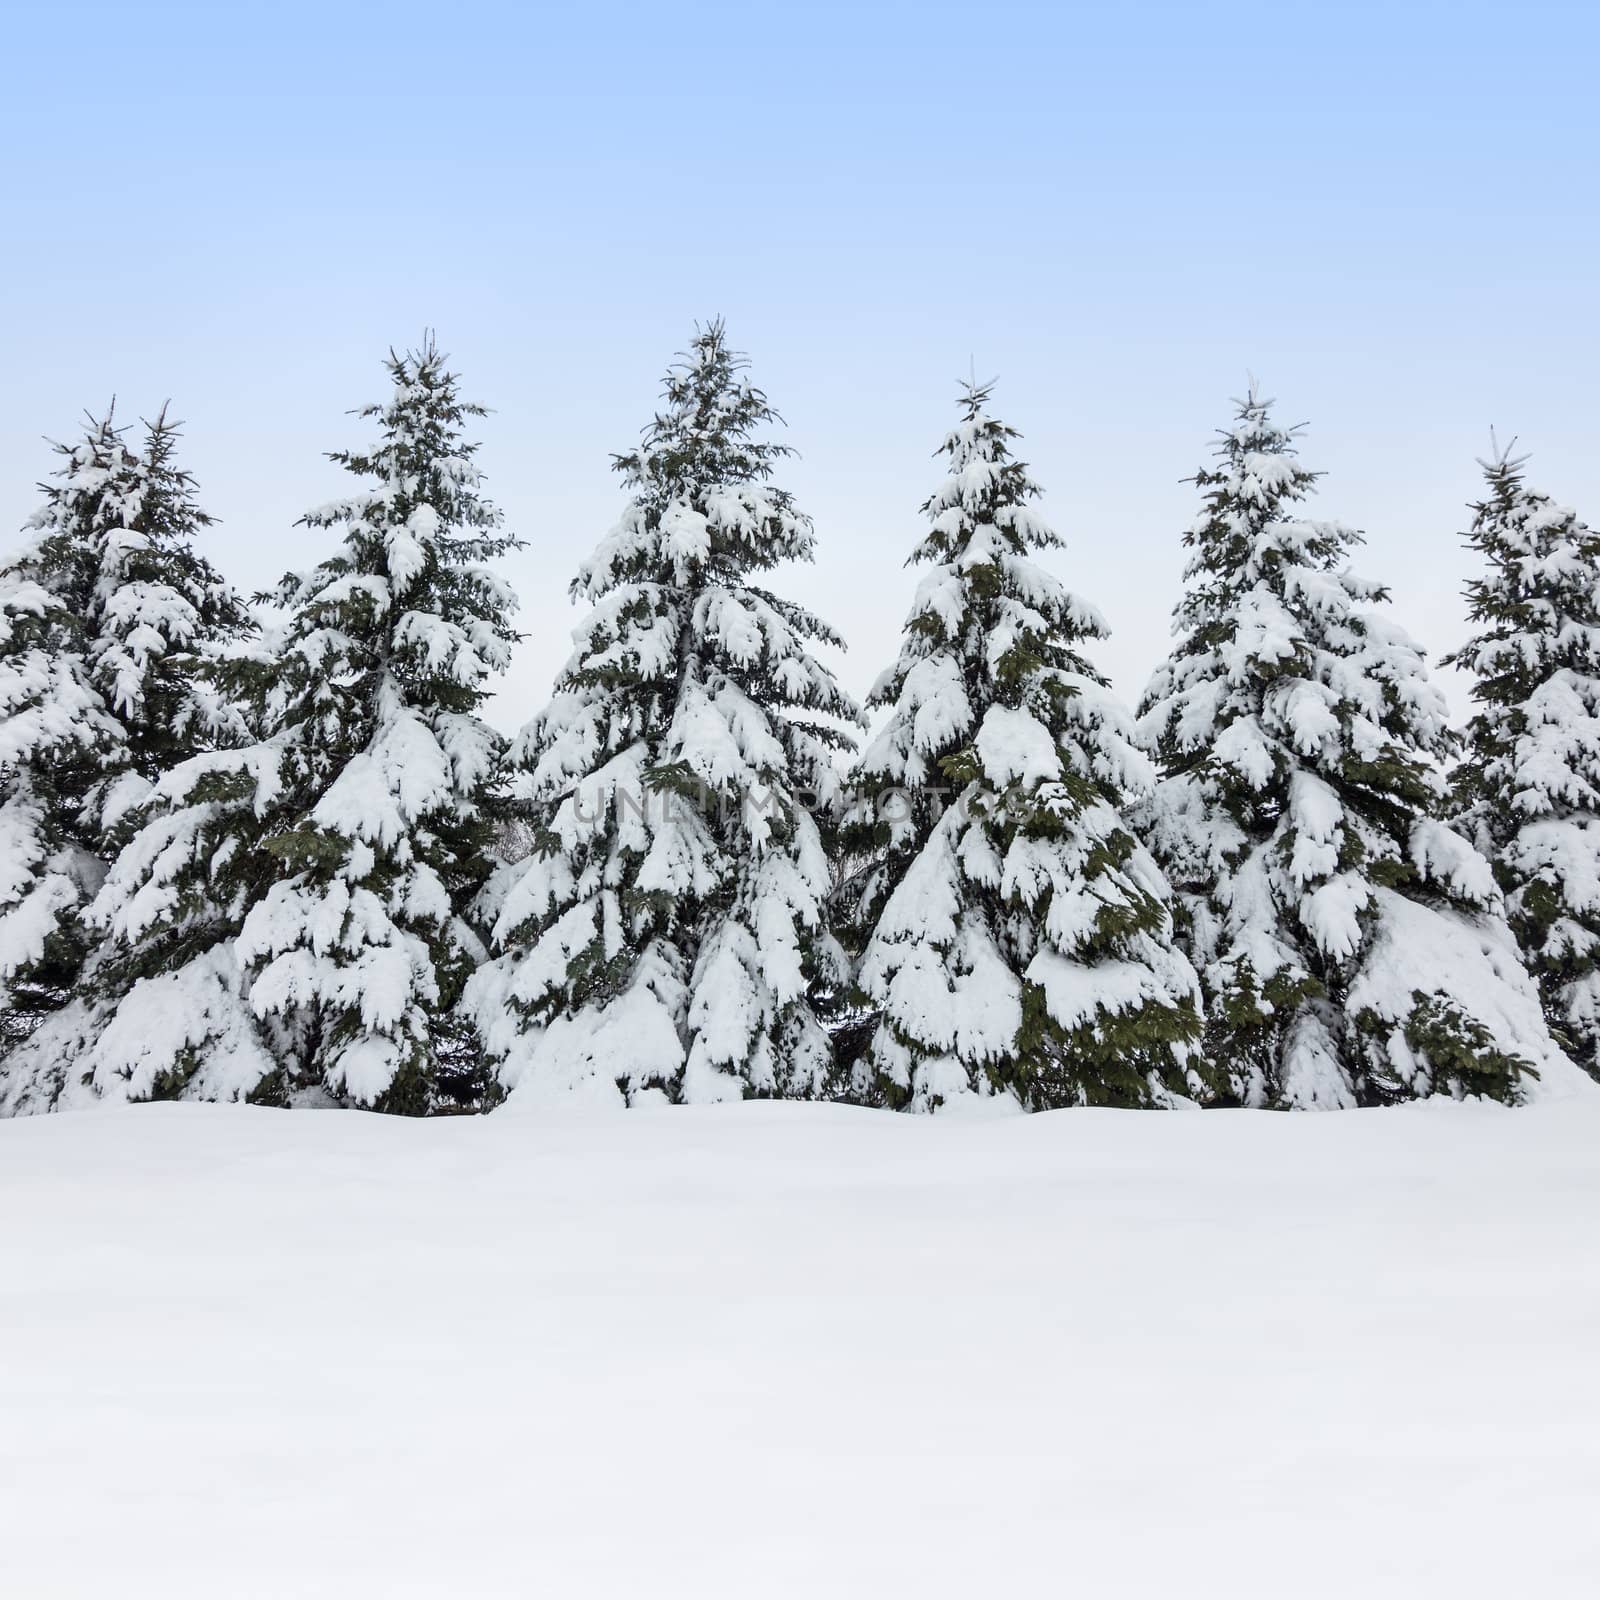 Fir trees covered by snow, winter beauty by anikasalsera